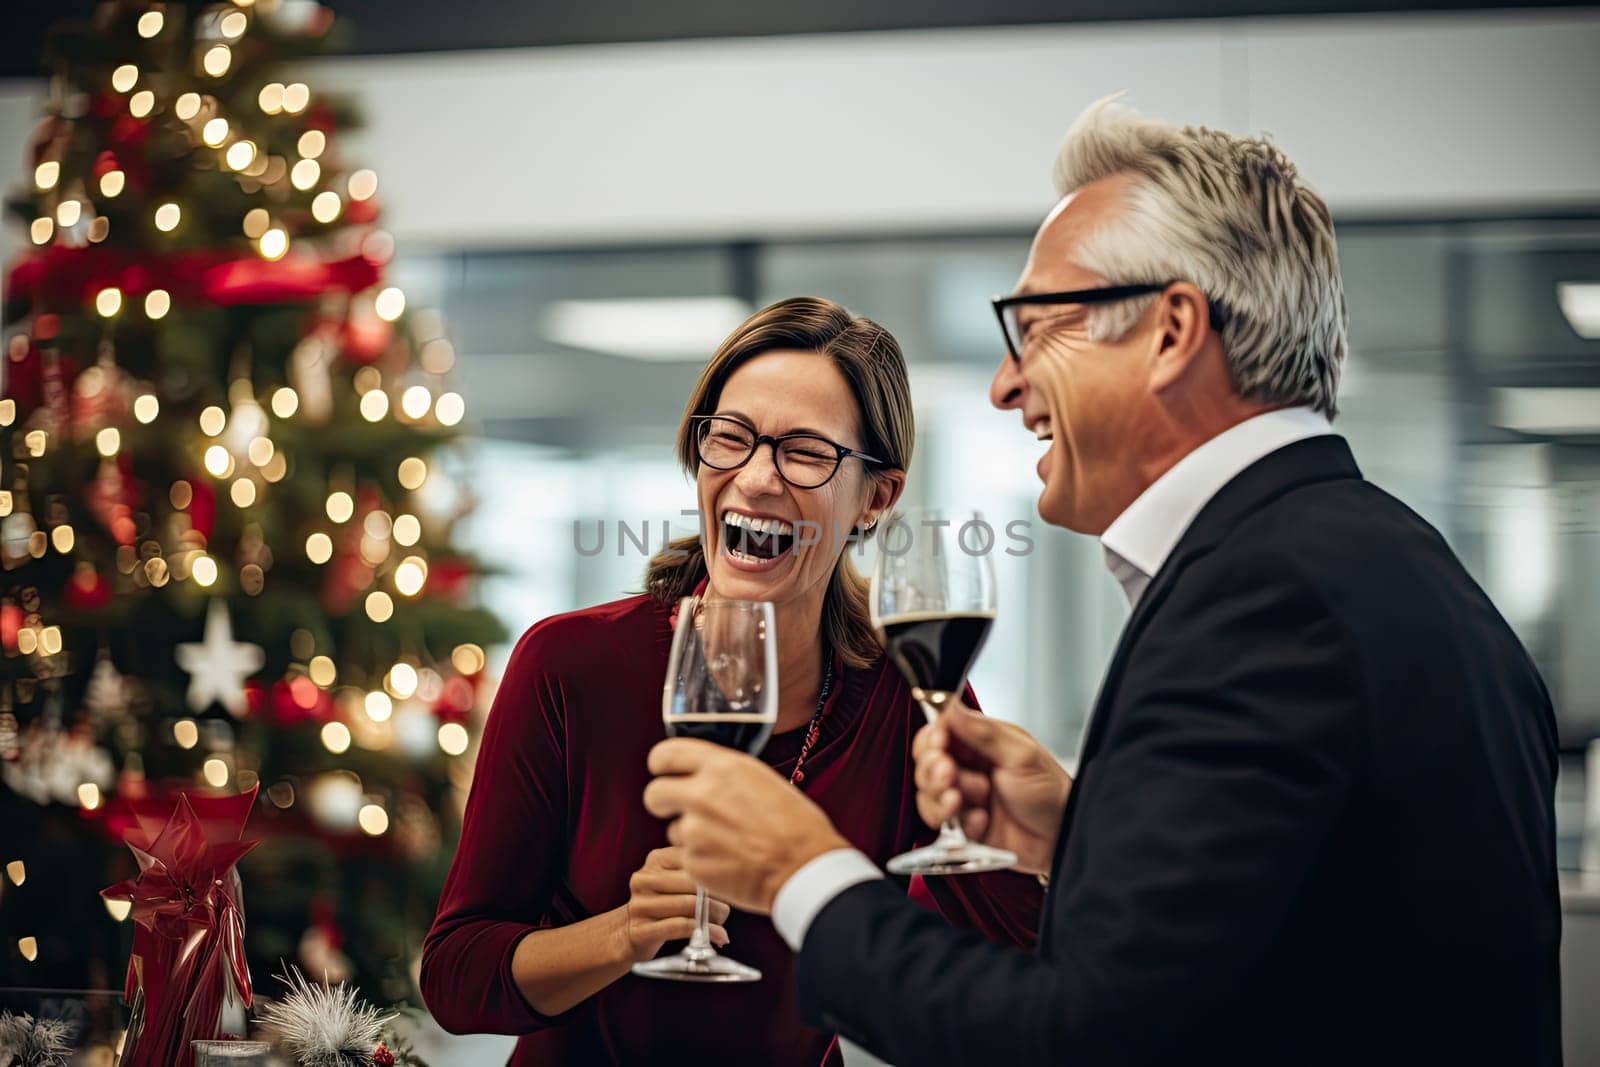 a man and woman drinking wine at a table with a christmas tree in the background that is decorated with lights